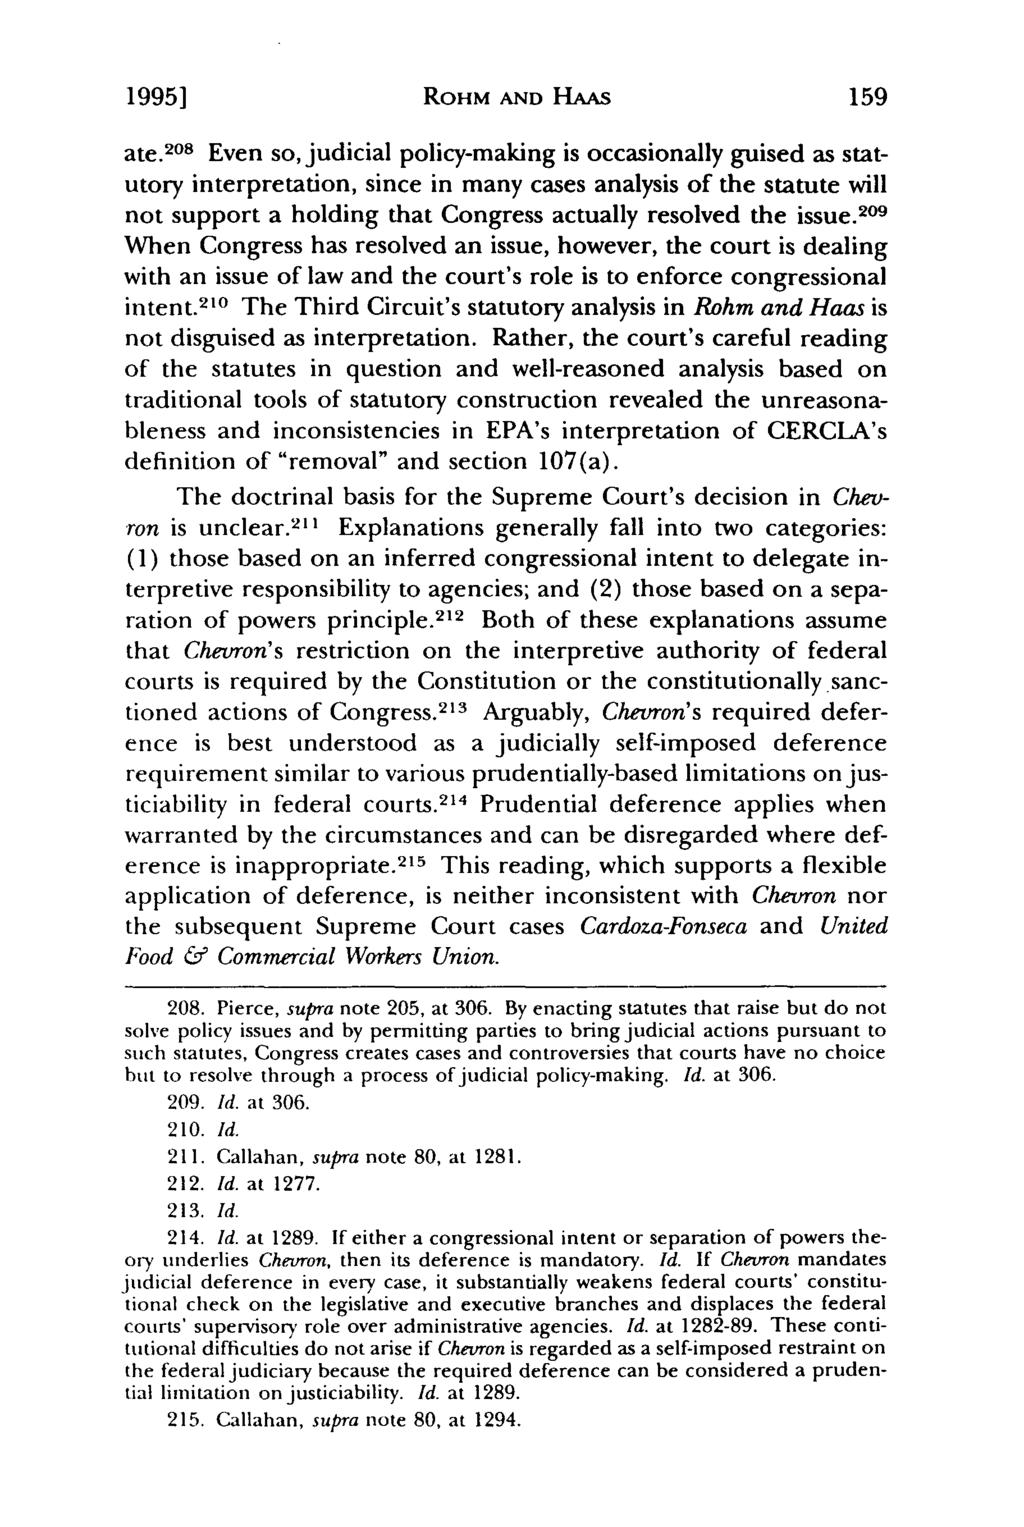 1995] Aberbach: Recoverability of Government Oversight Costs under CERCLA Section ROHM AND HAAS ate.